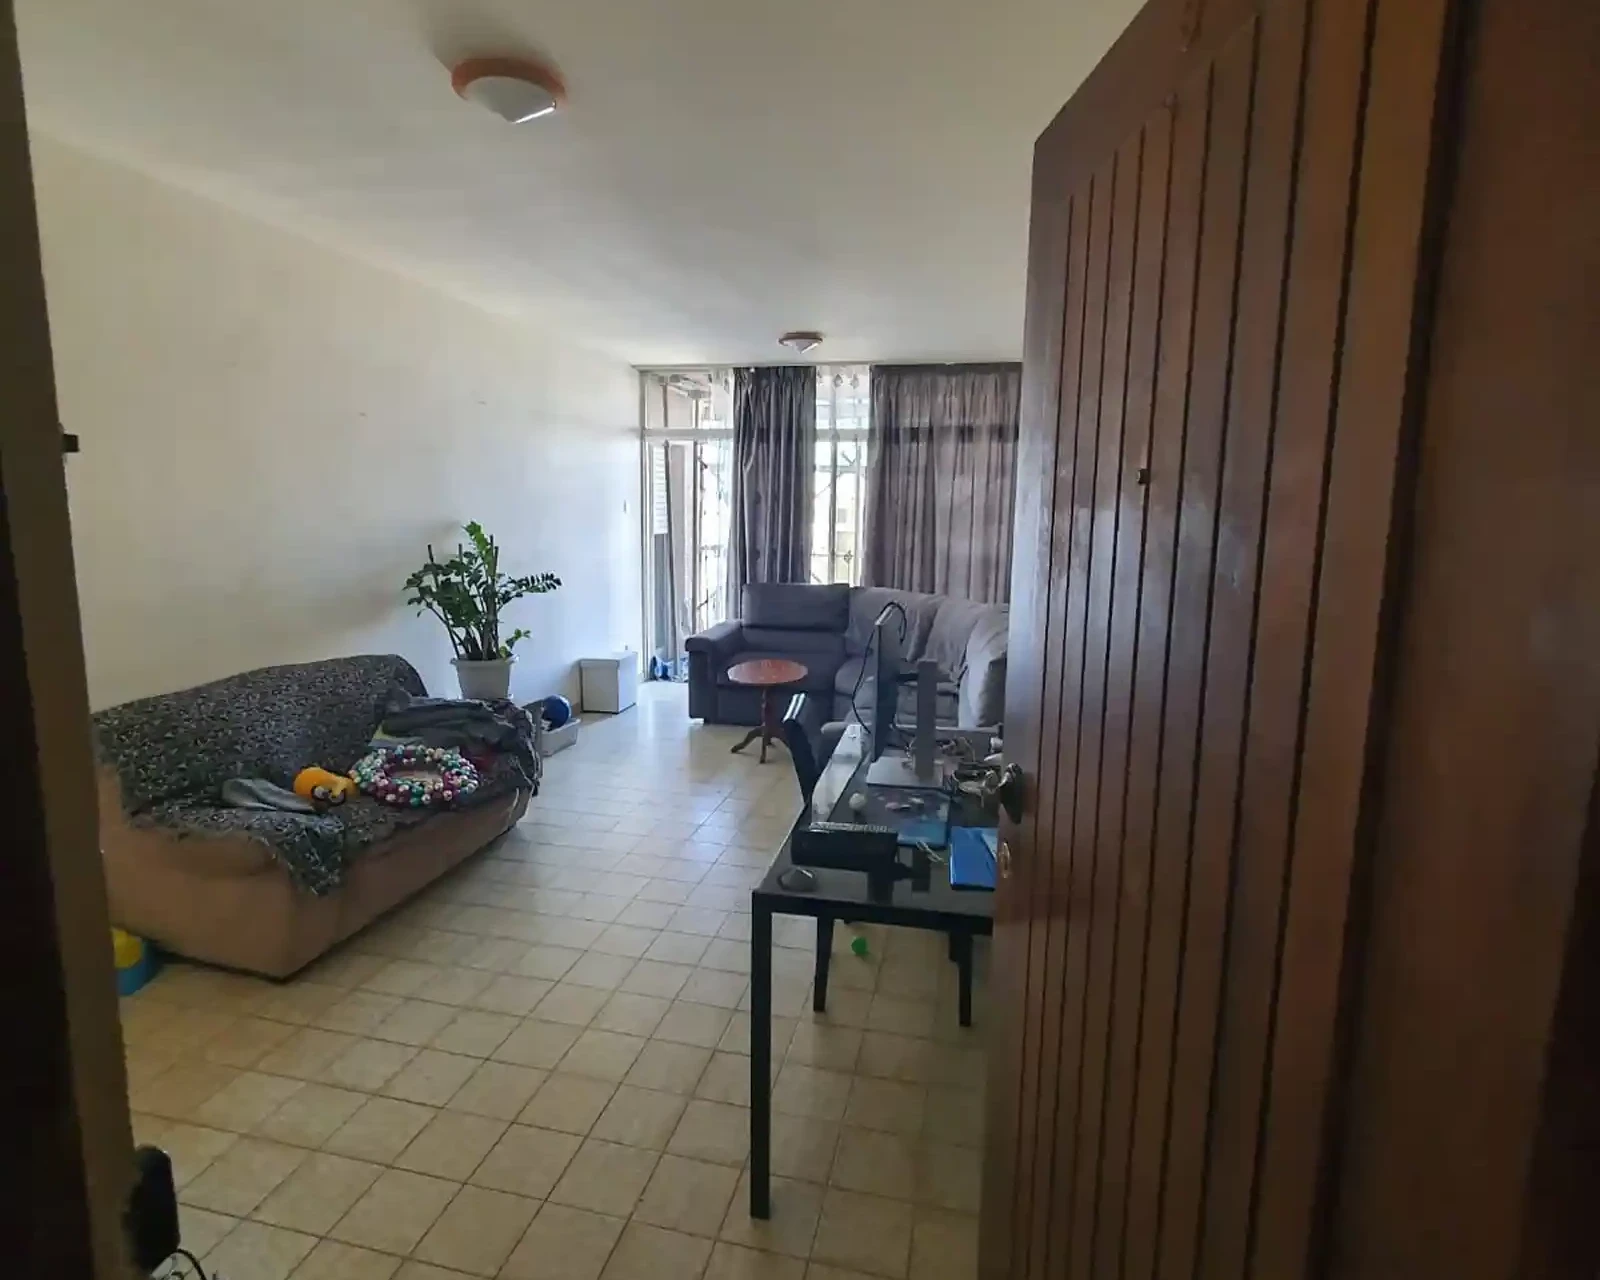 3-bedroom apartment fоr sаle €190.000, image 1